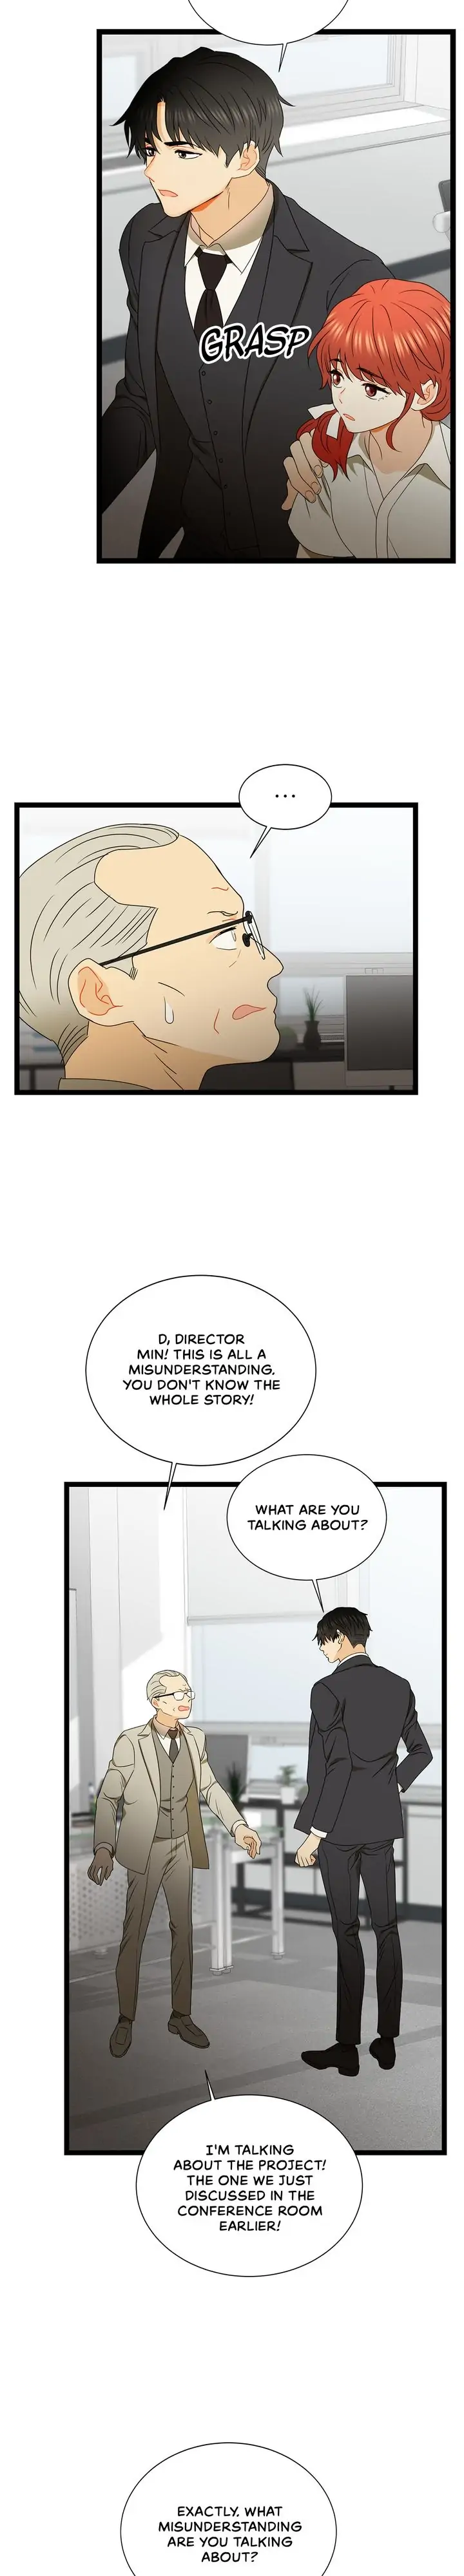 Faking It In Style - Page 2